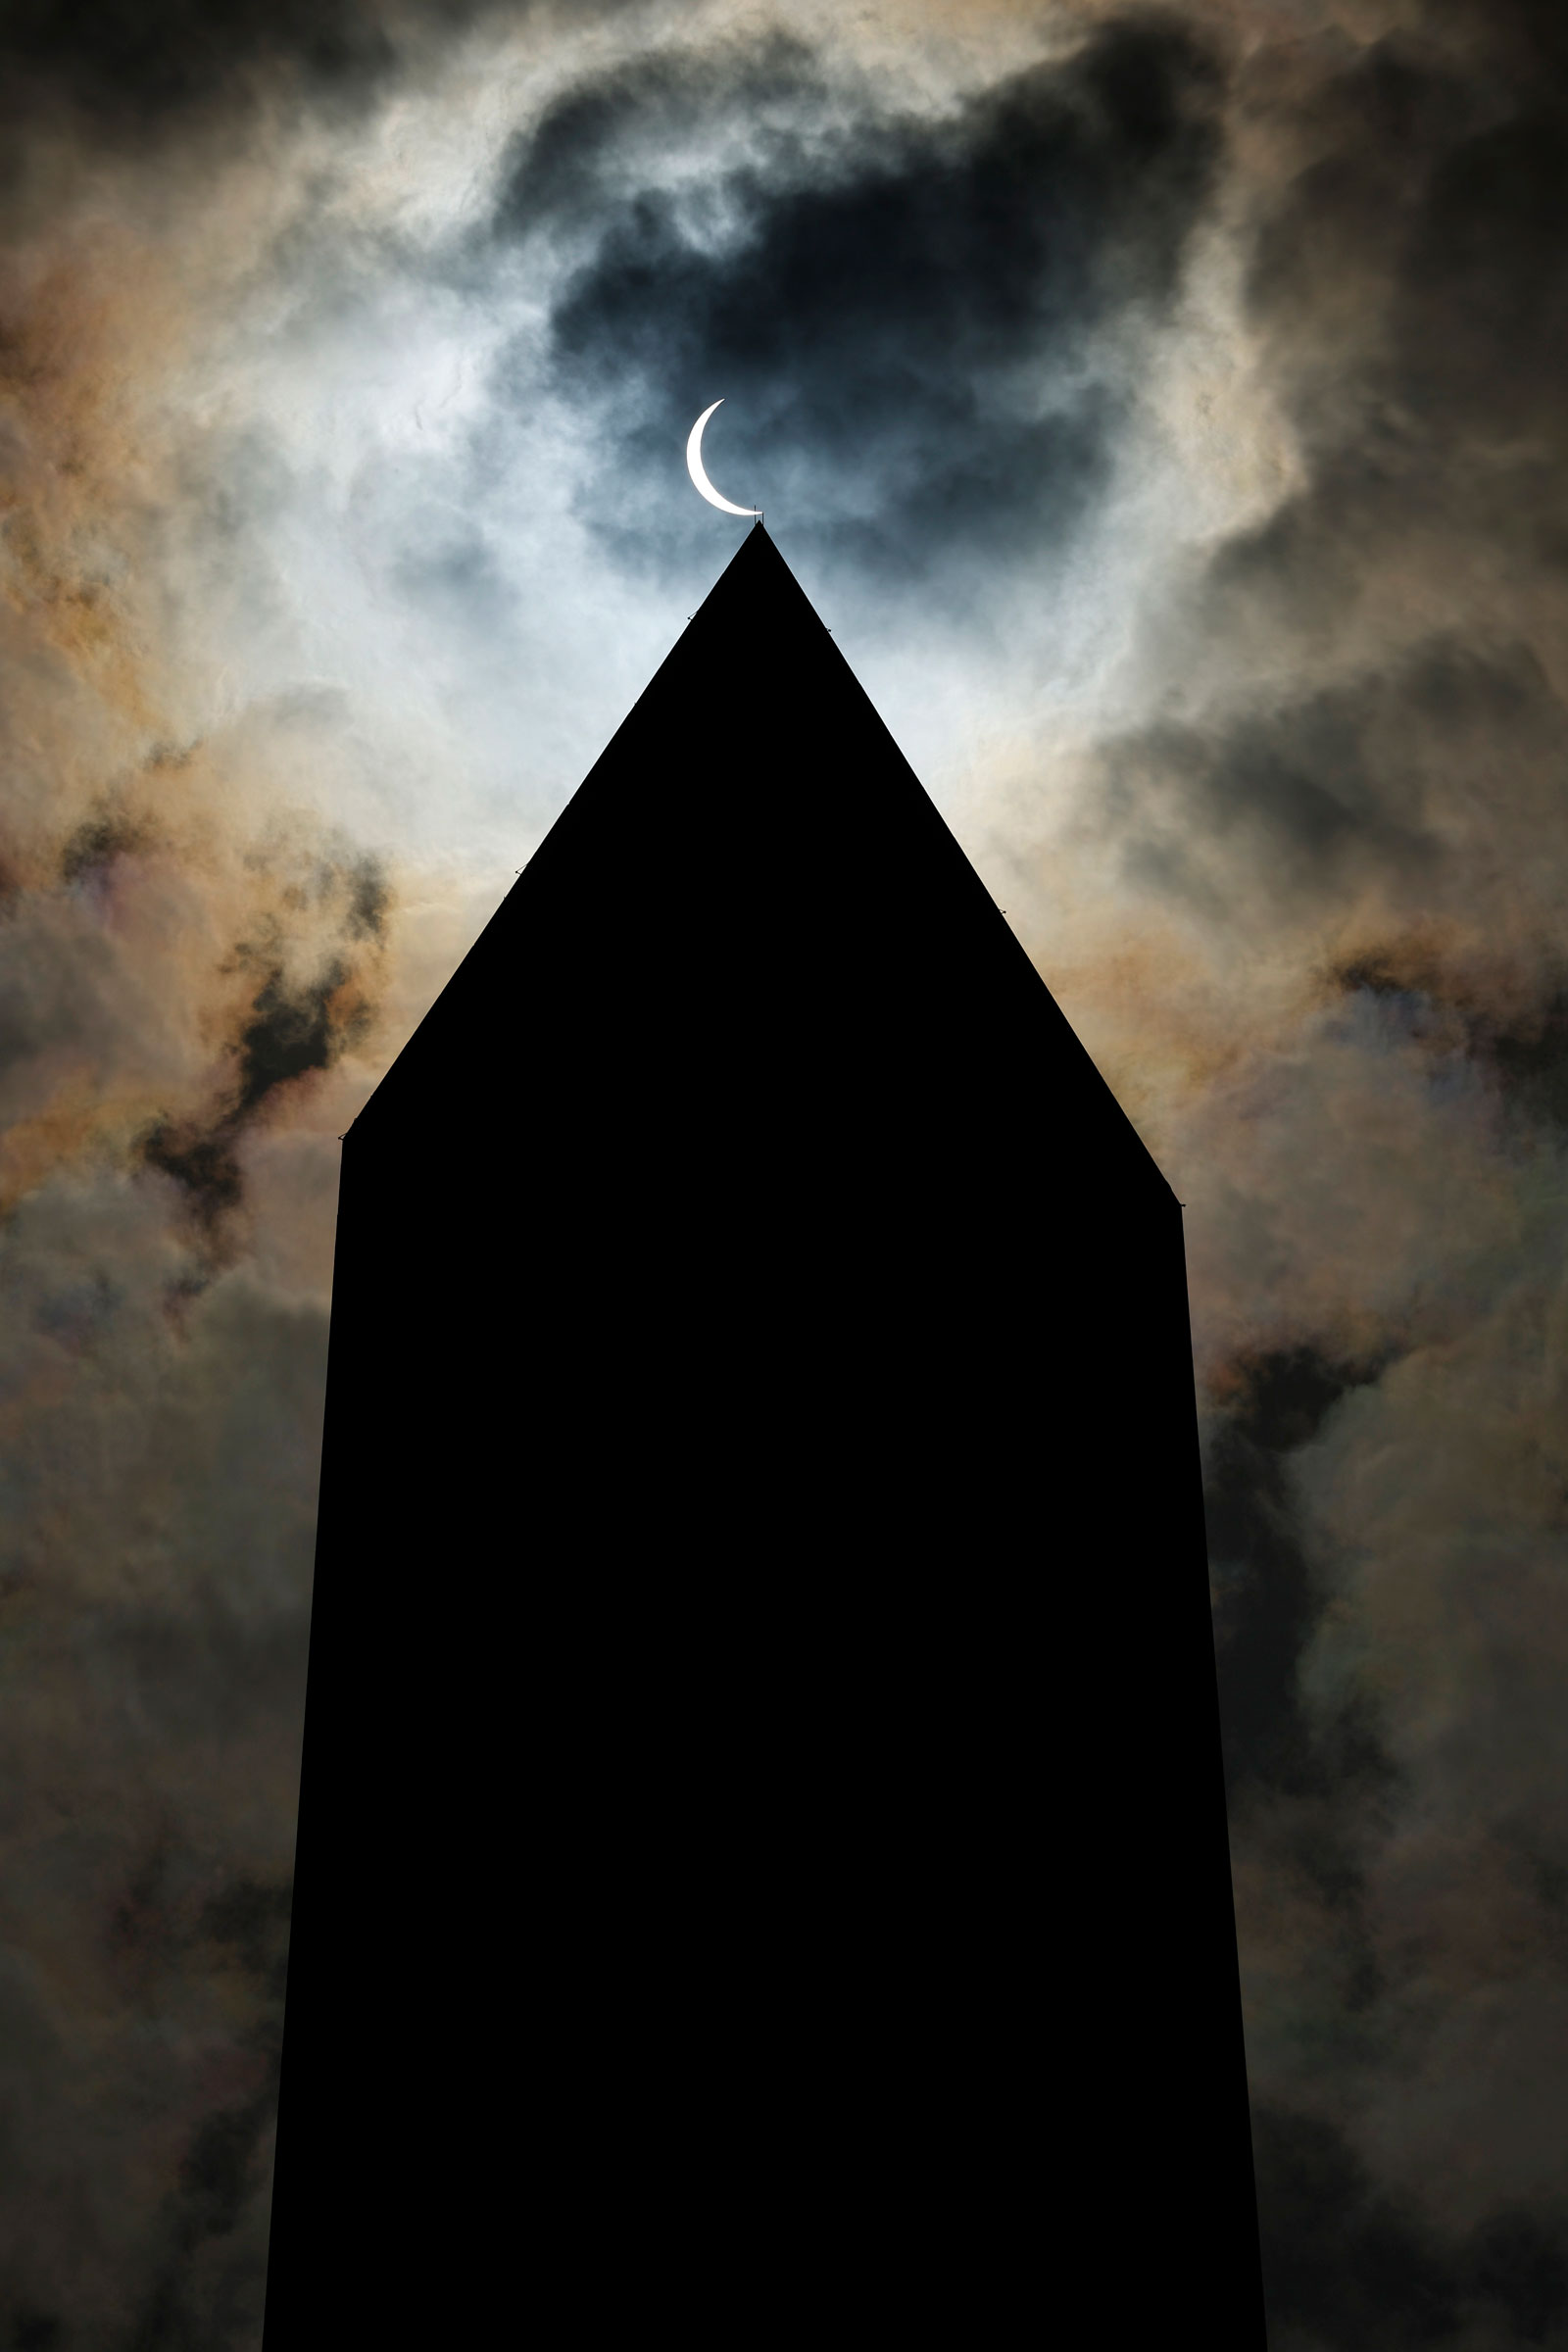 The solar eclipse is seen above the Washington Monument in Washington, D.C.